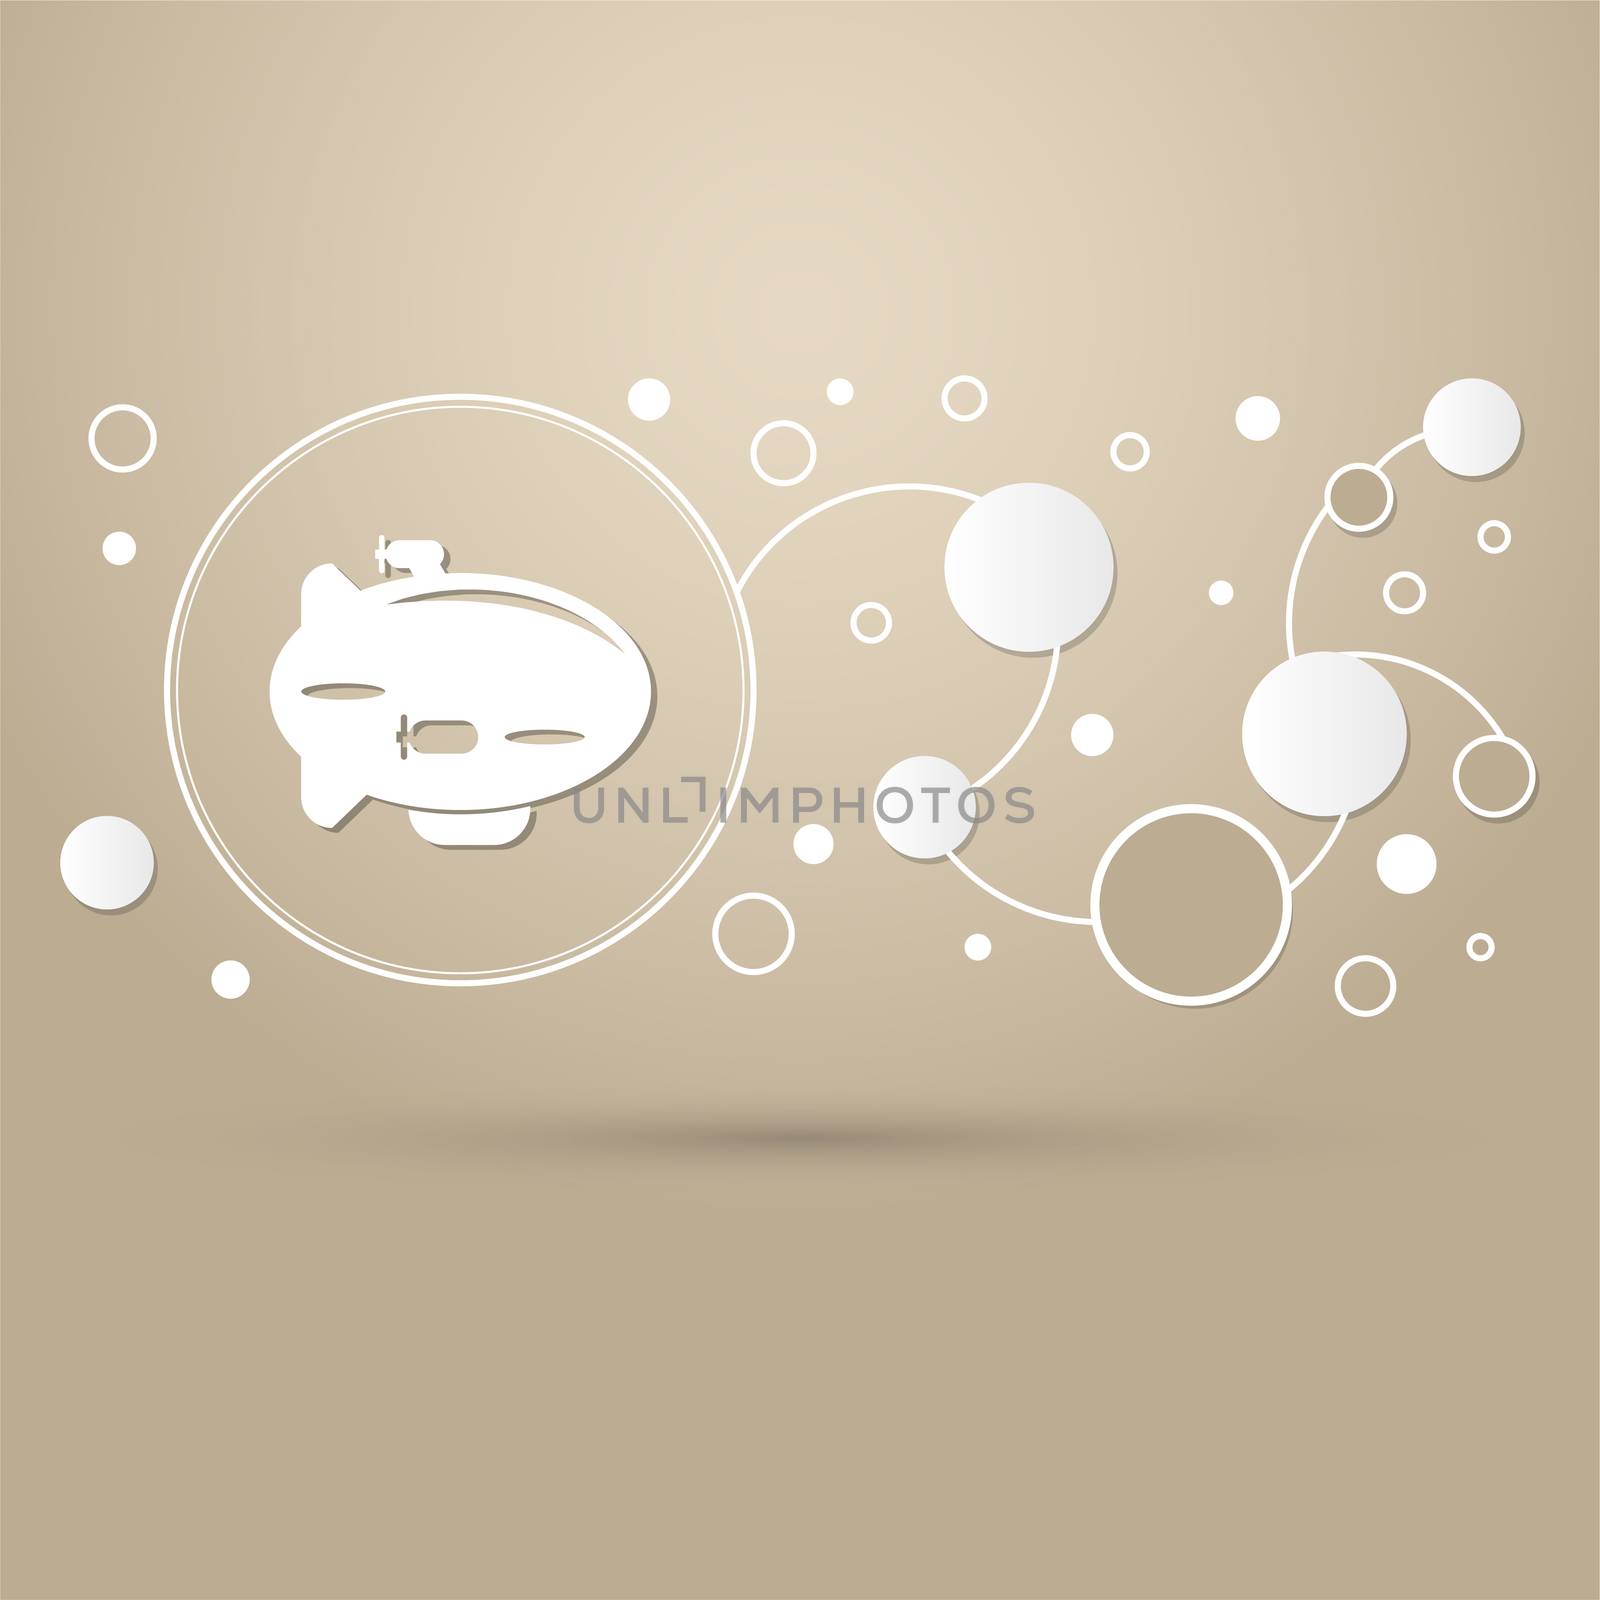 Airship Icon on a brown background with elegant style and modern design infographic.  by Adamchuk